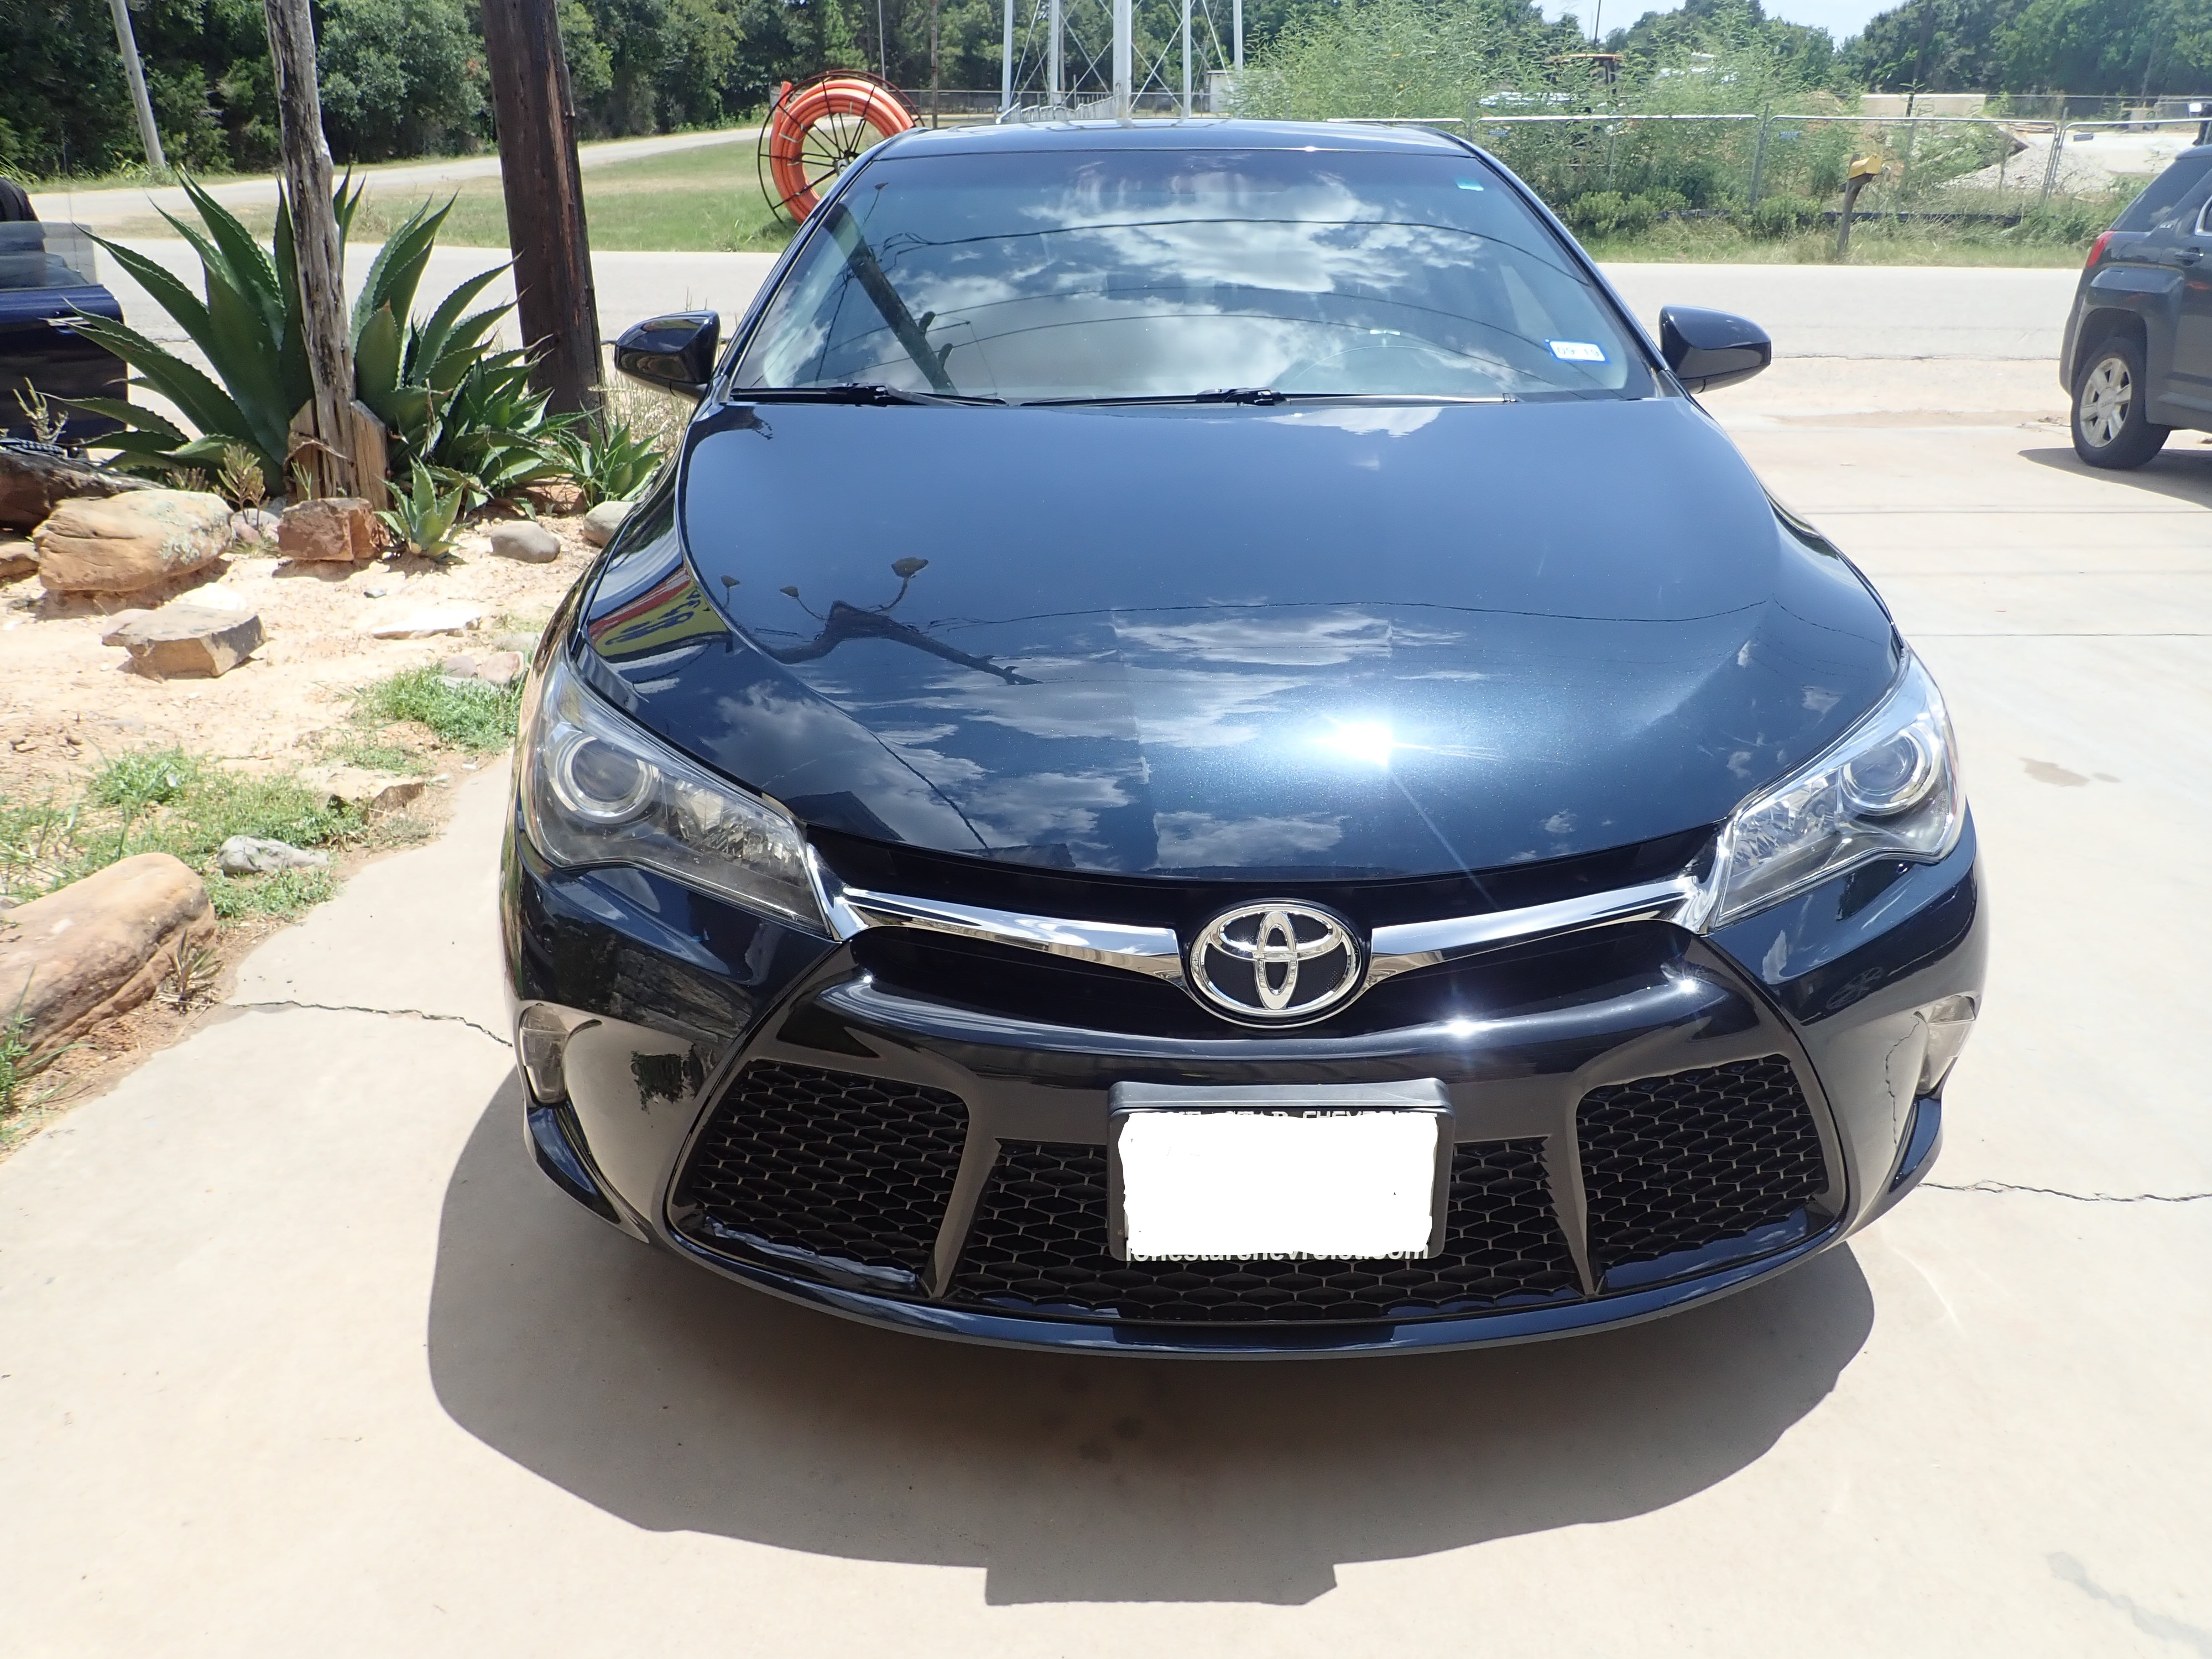 2016 Toyota Camry
Repairs Completed